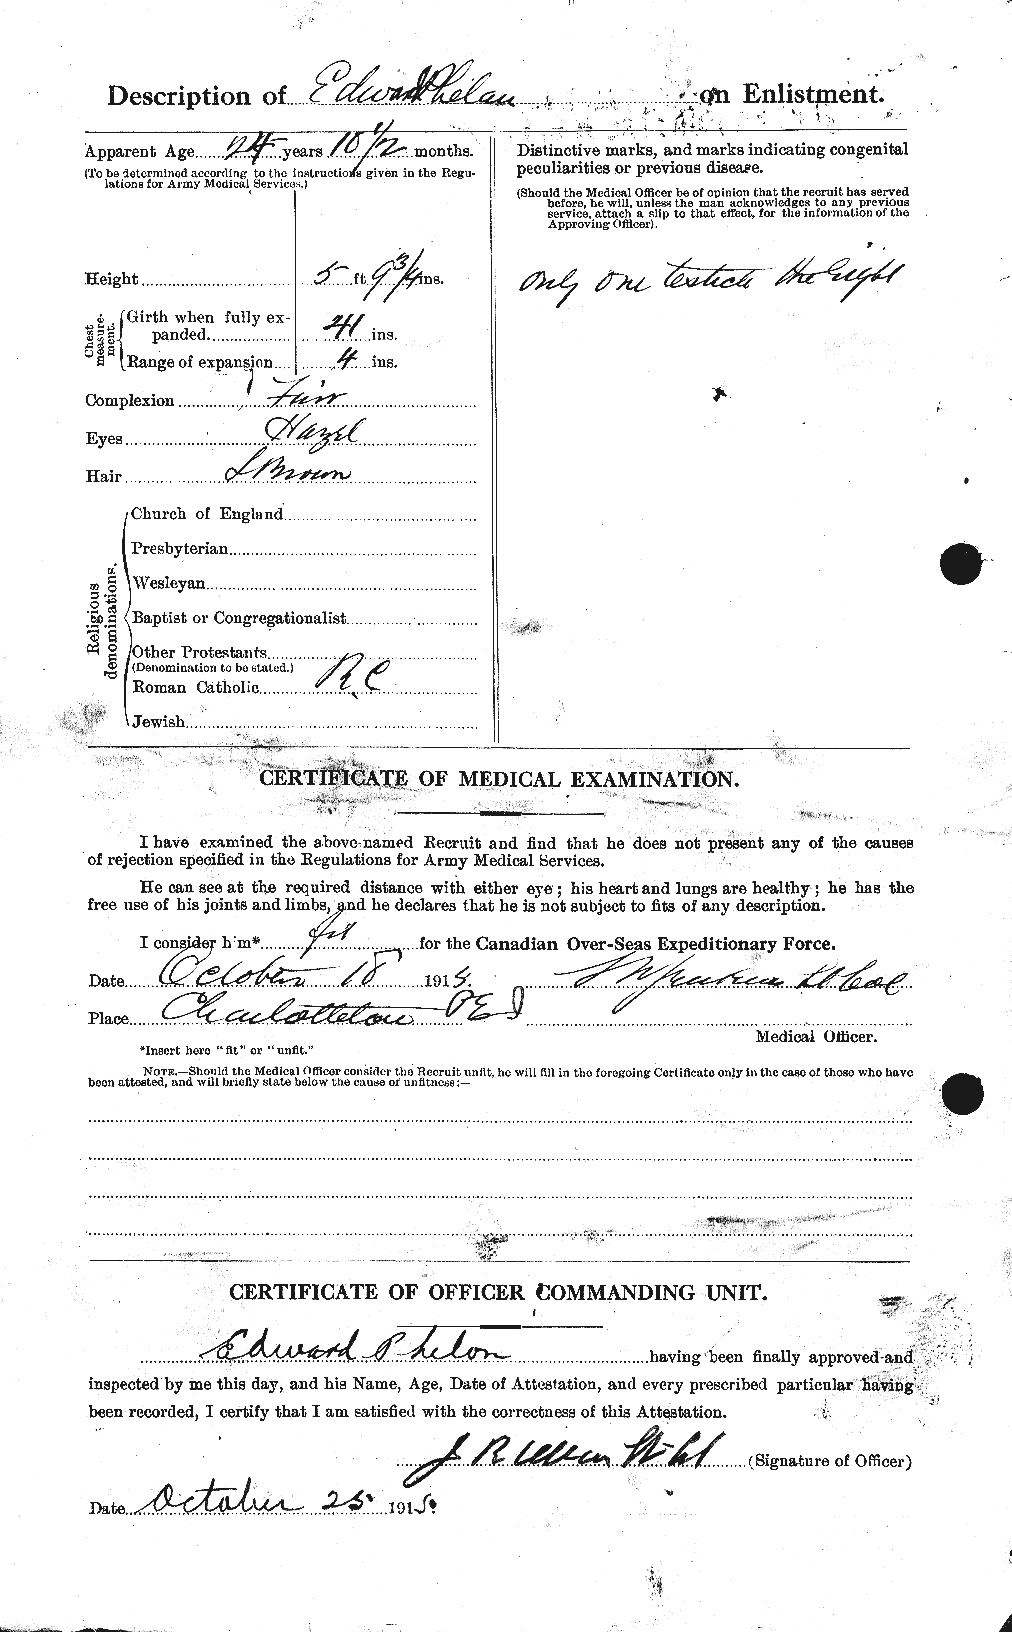 Personnel Records of the First World War - CEF 576979b